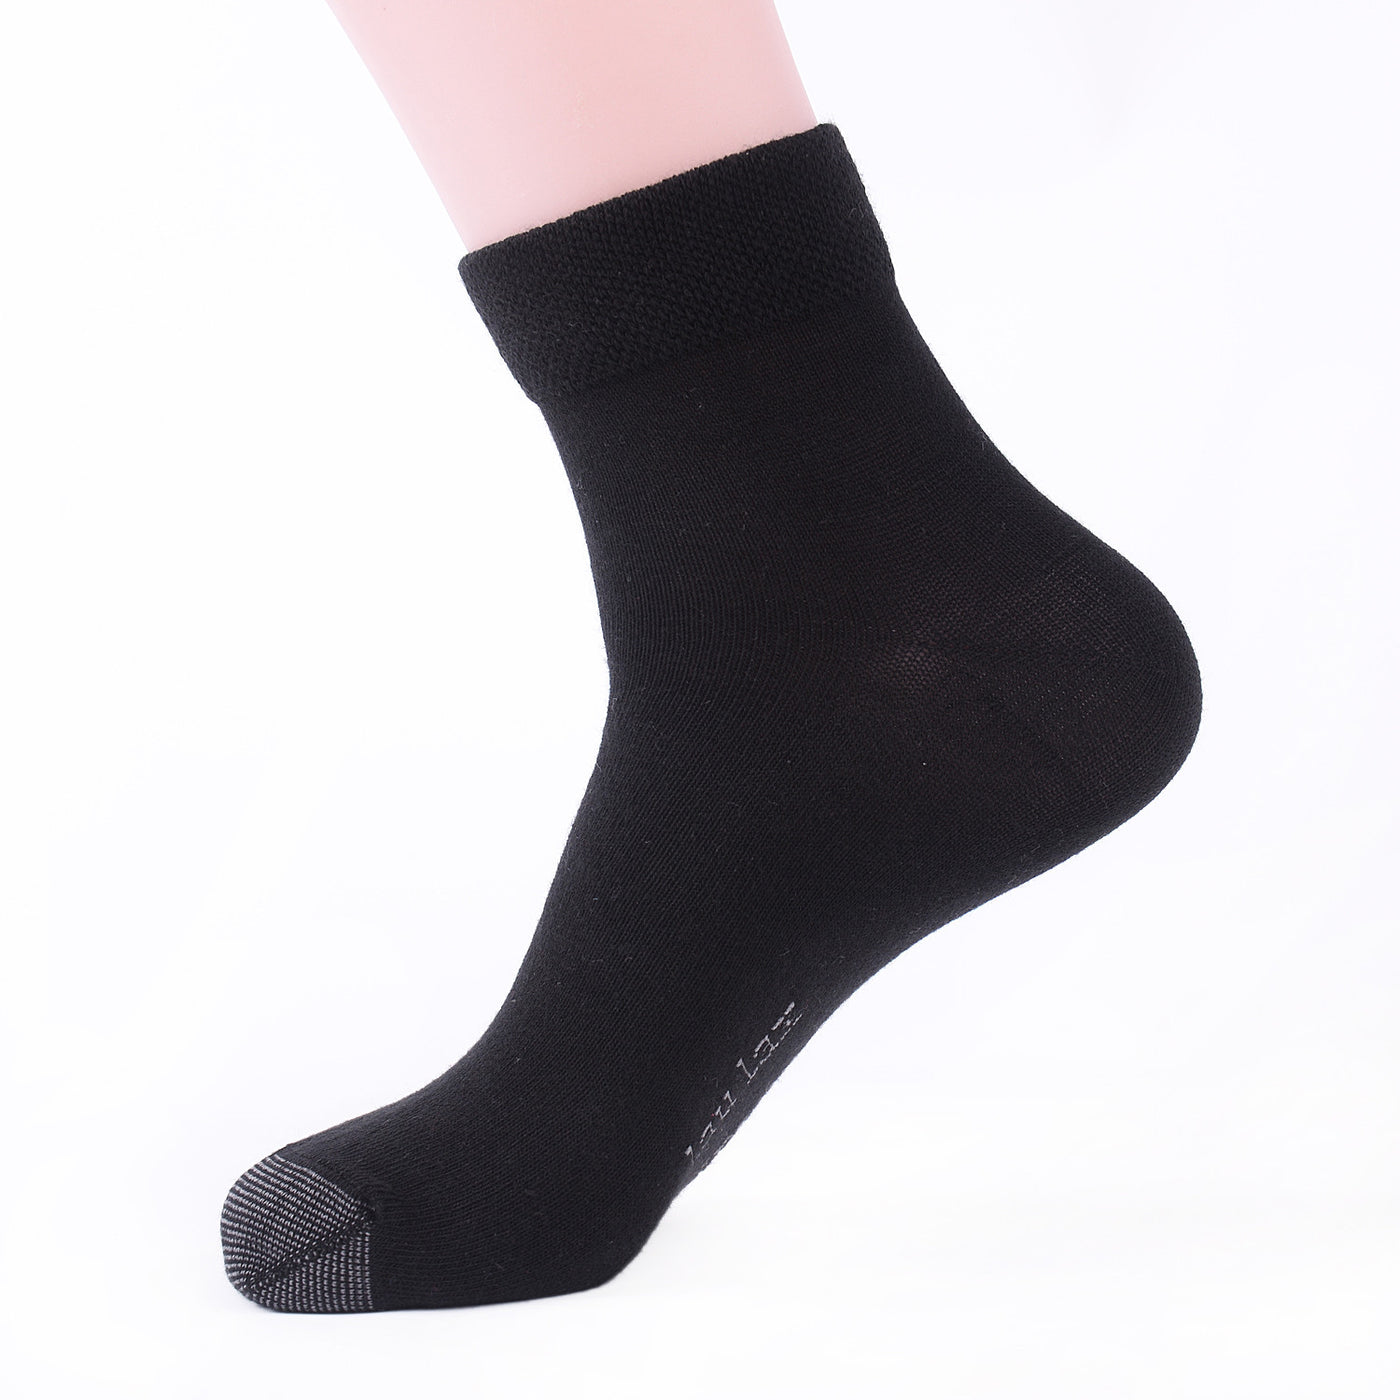 6 Pairs Smooth Seamless Toe Finest Combed Cotton Black Socks, Gift Set